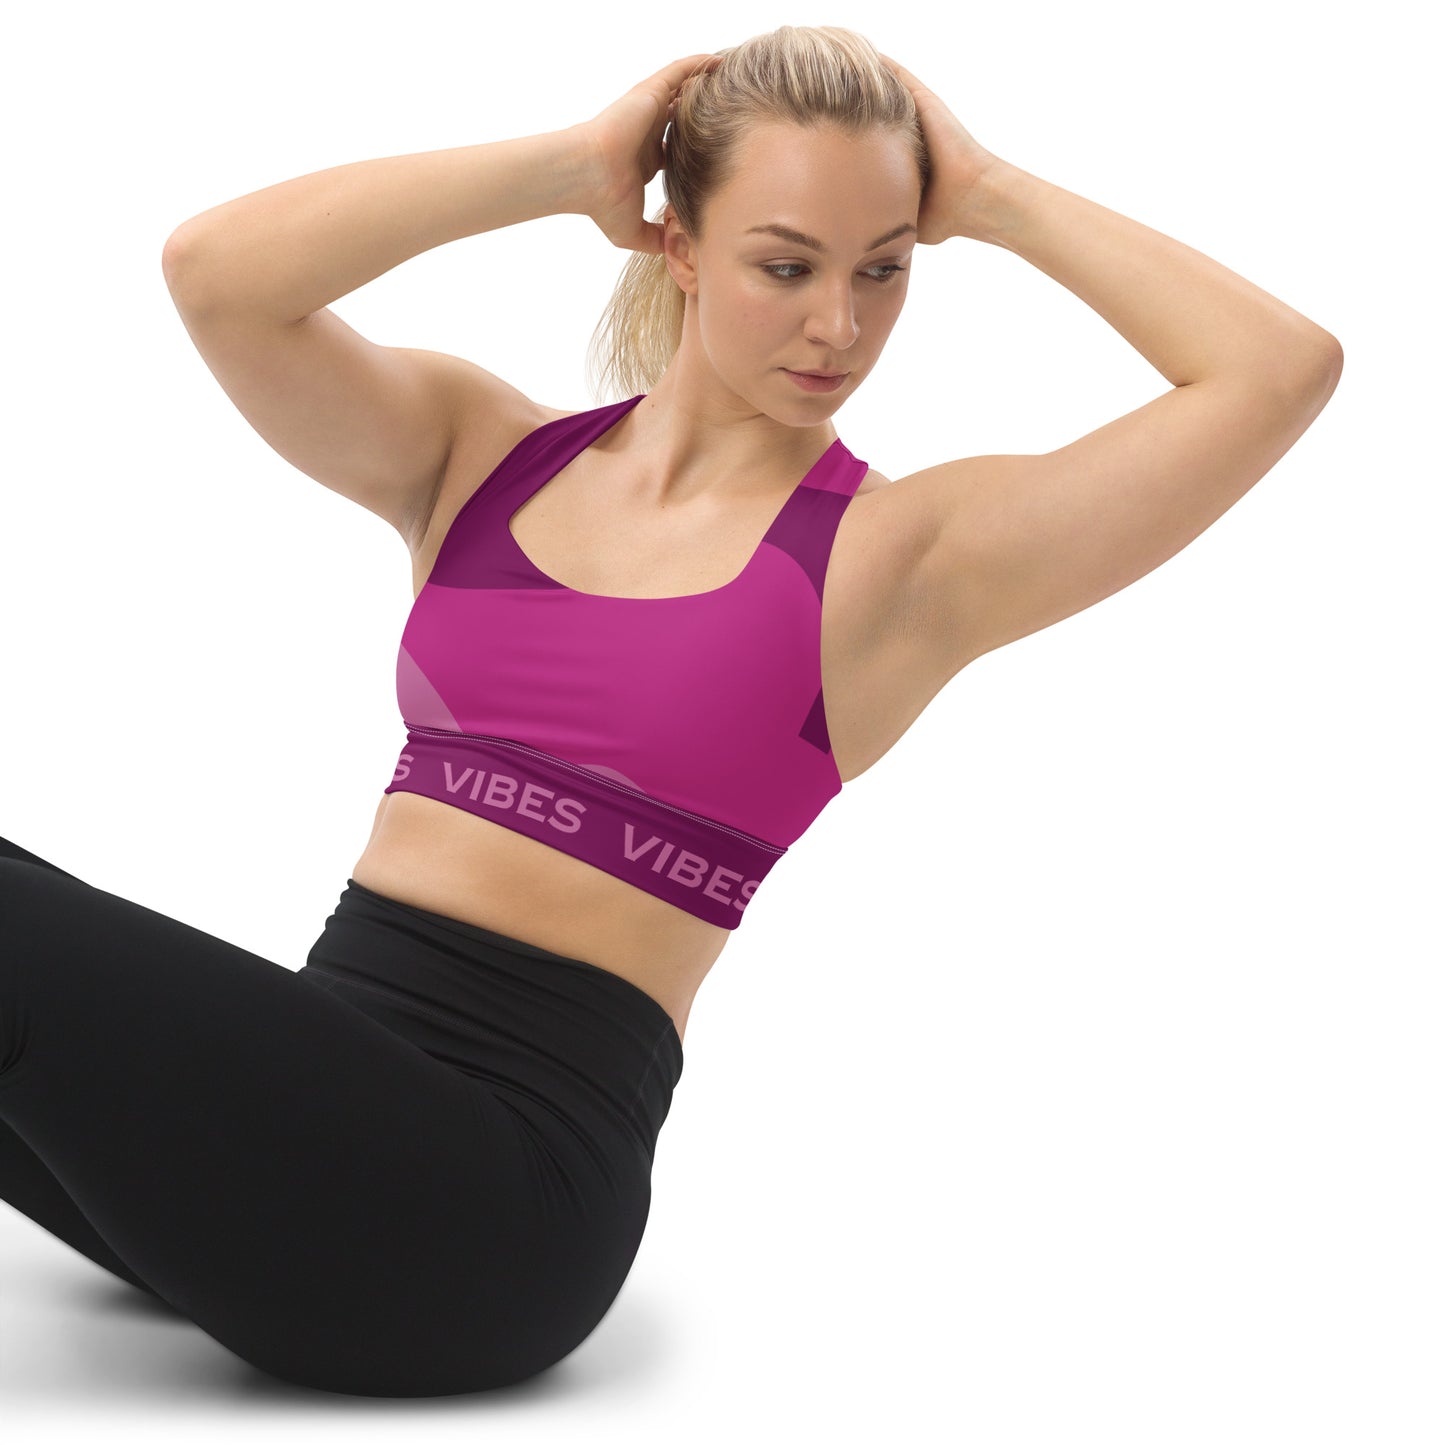 TIME OF VIBES - Longline sports bra ABSTRACT (Pink) - €49.00